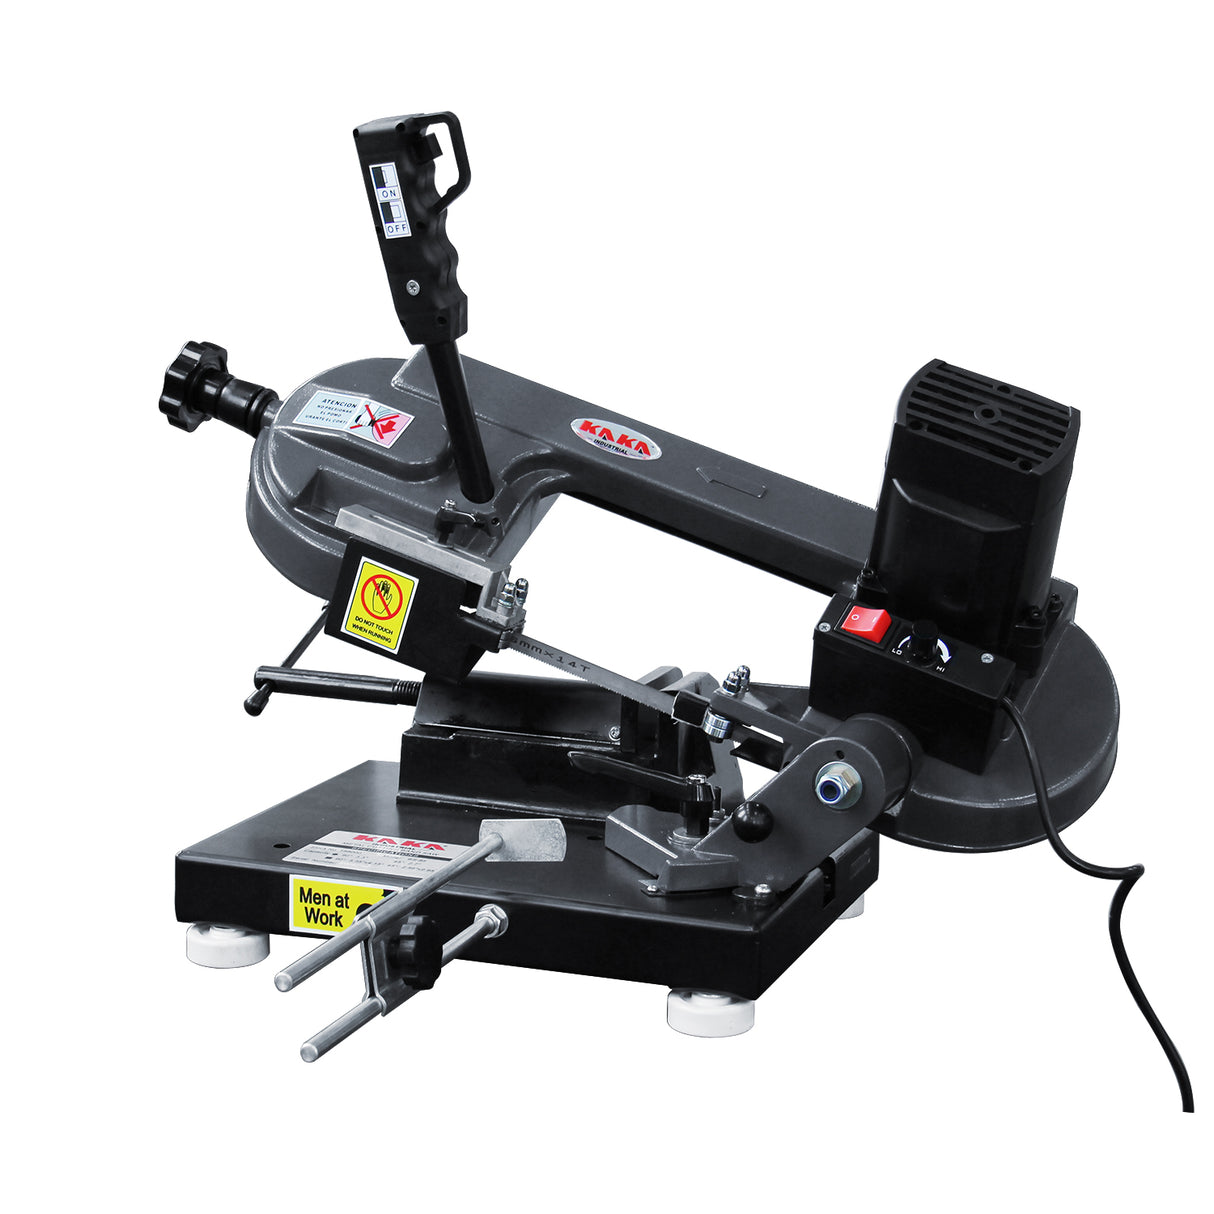 Powerful Gear Drive for Efficient Cutting - Get the Job Done Quickly and Accurately